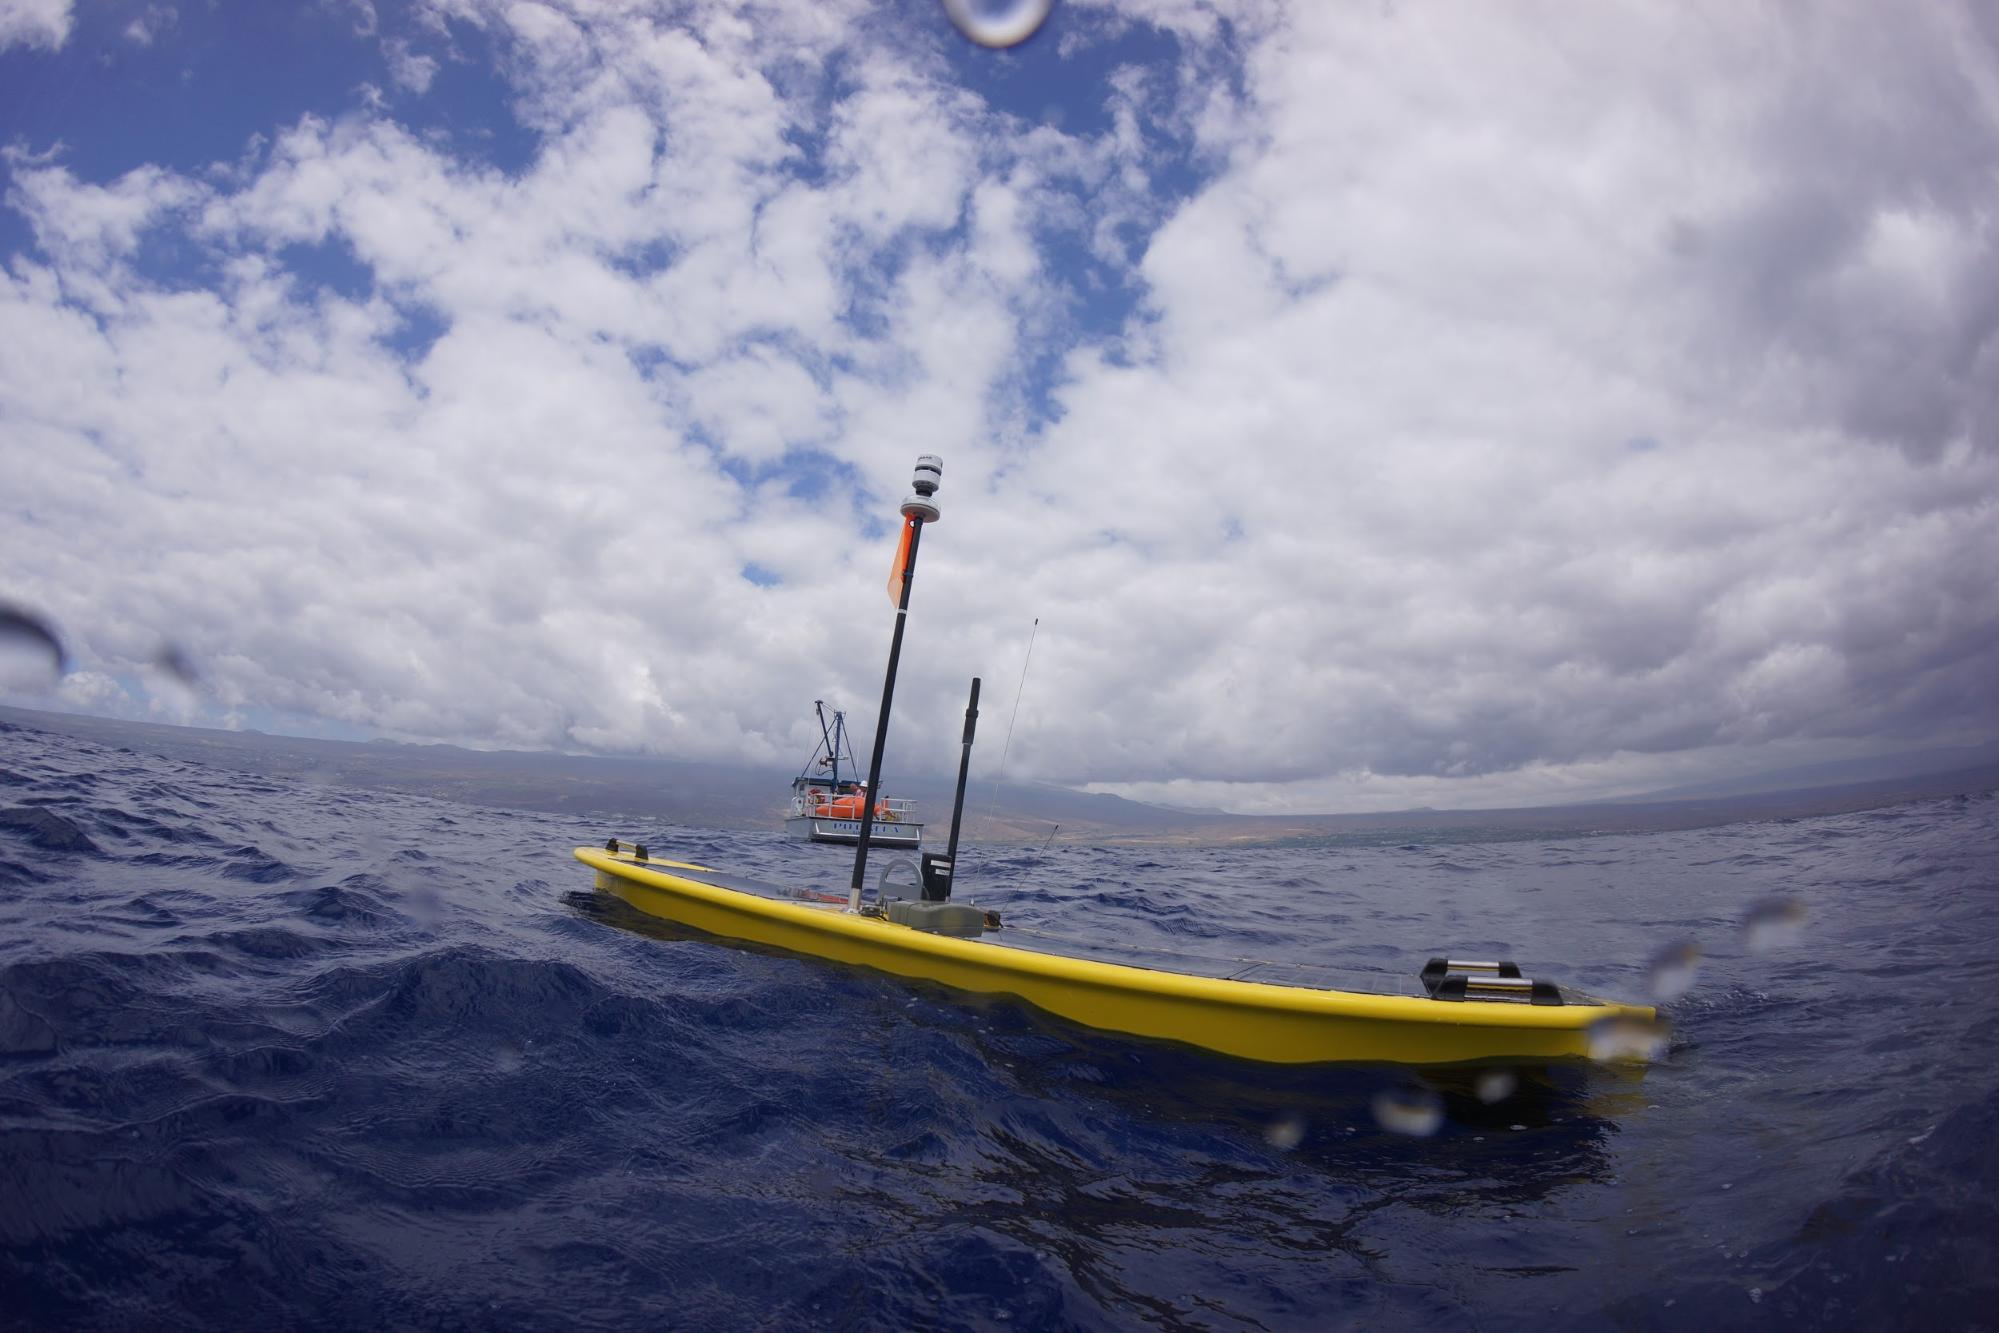 Figure 1. The regenerative wave- and solar-powered Wave Glider by Liquid Robotics is capable of traversing oceans autonomously with Jetson on board for low-power vision and AI processing.